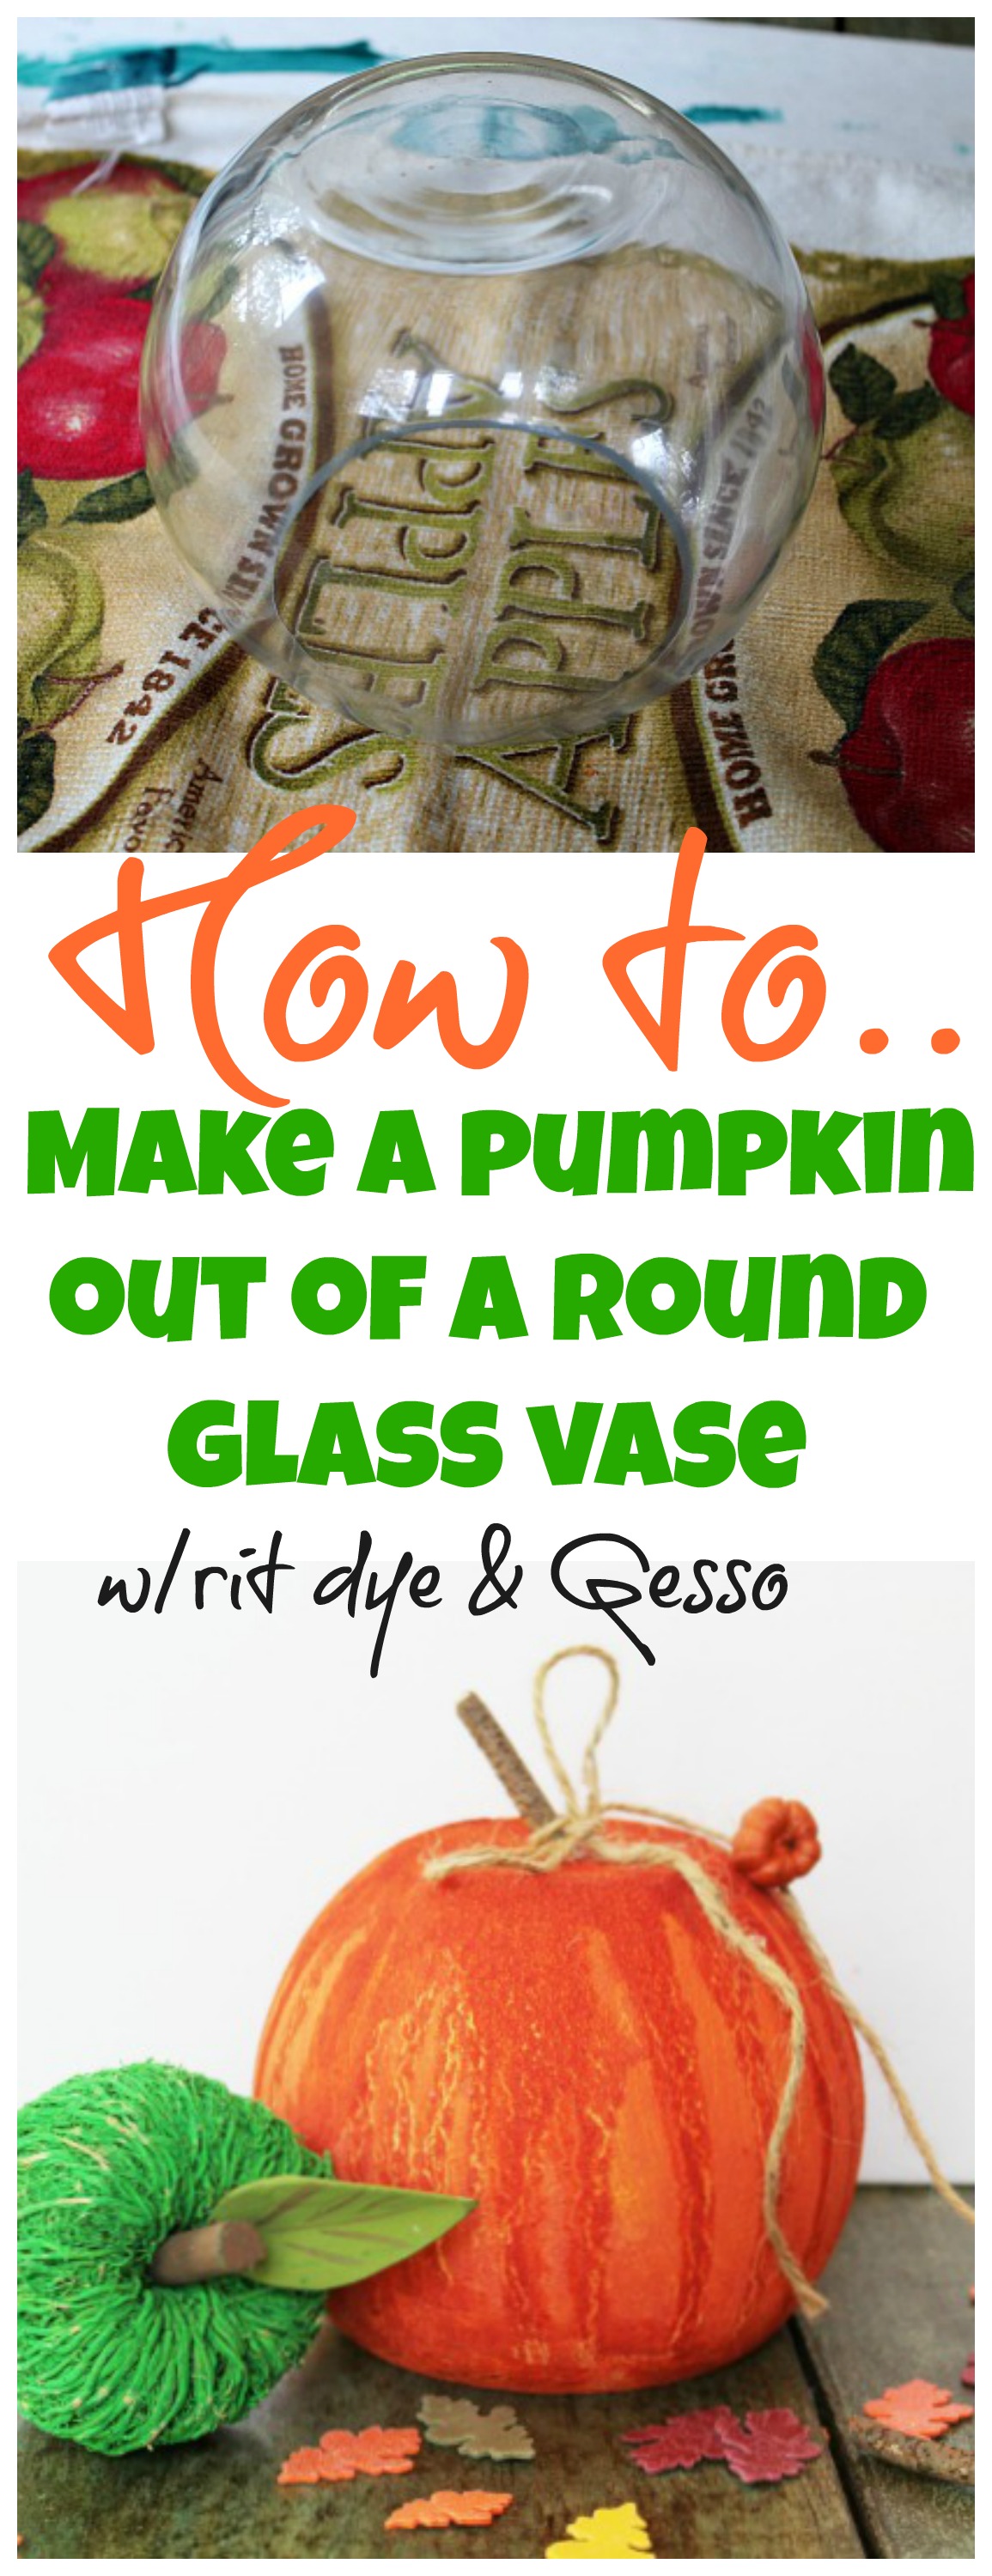 How to make a glass round vase into a pumpkin with Rit dye and Gesso